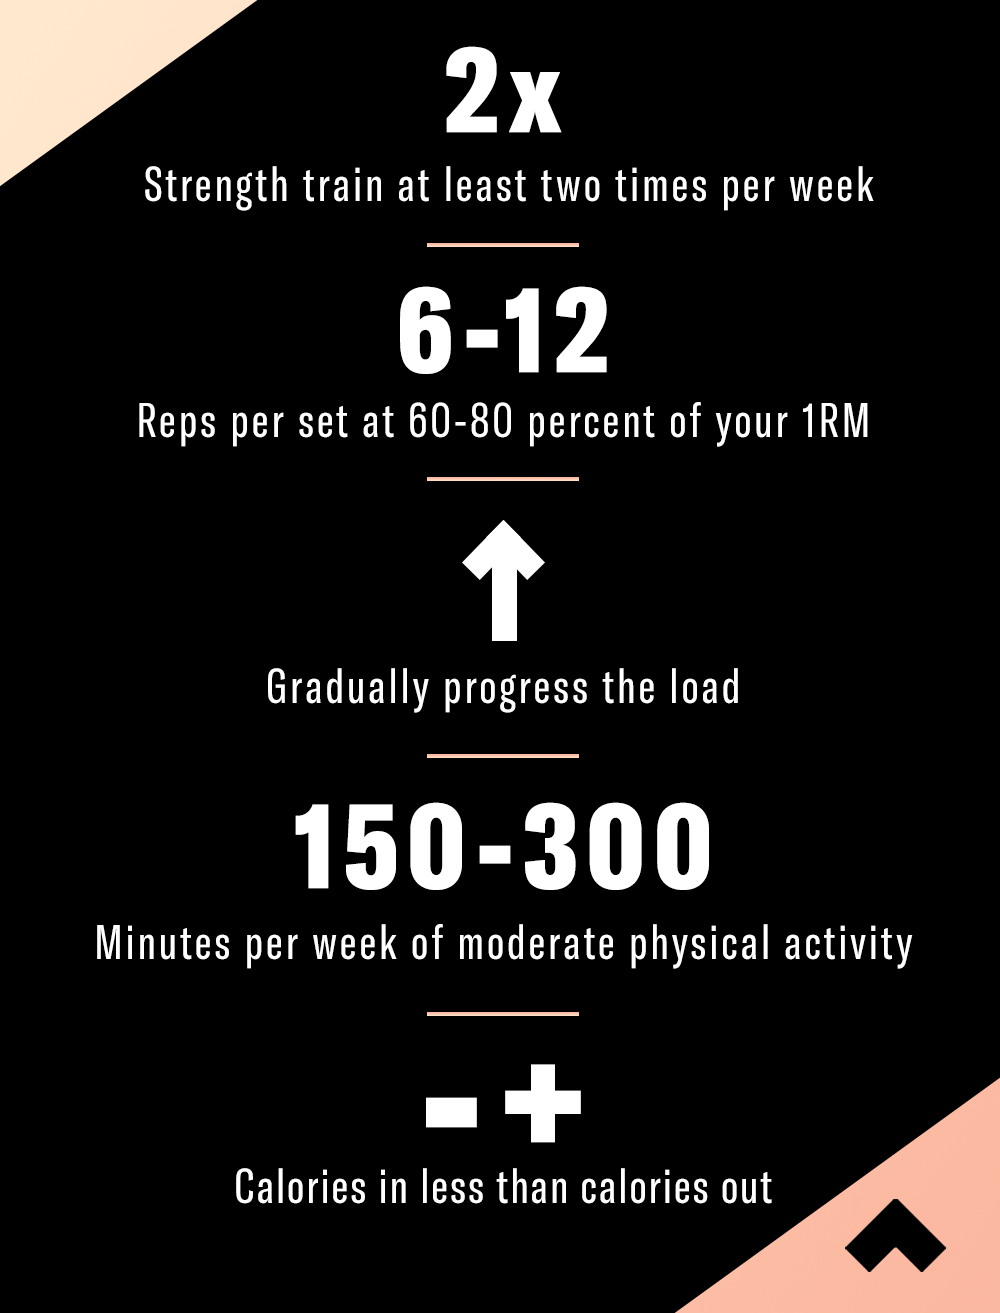 infographic for strength training during weight loss with the following information: 2x - Strength train at least two times per week
